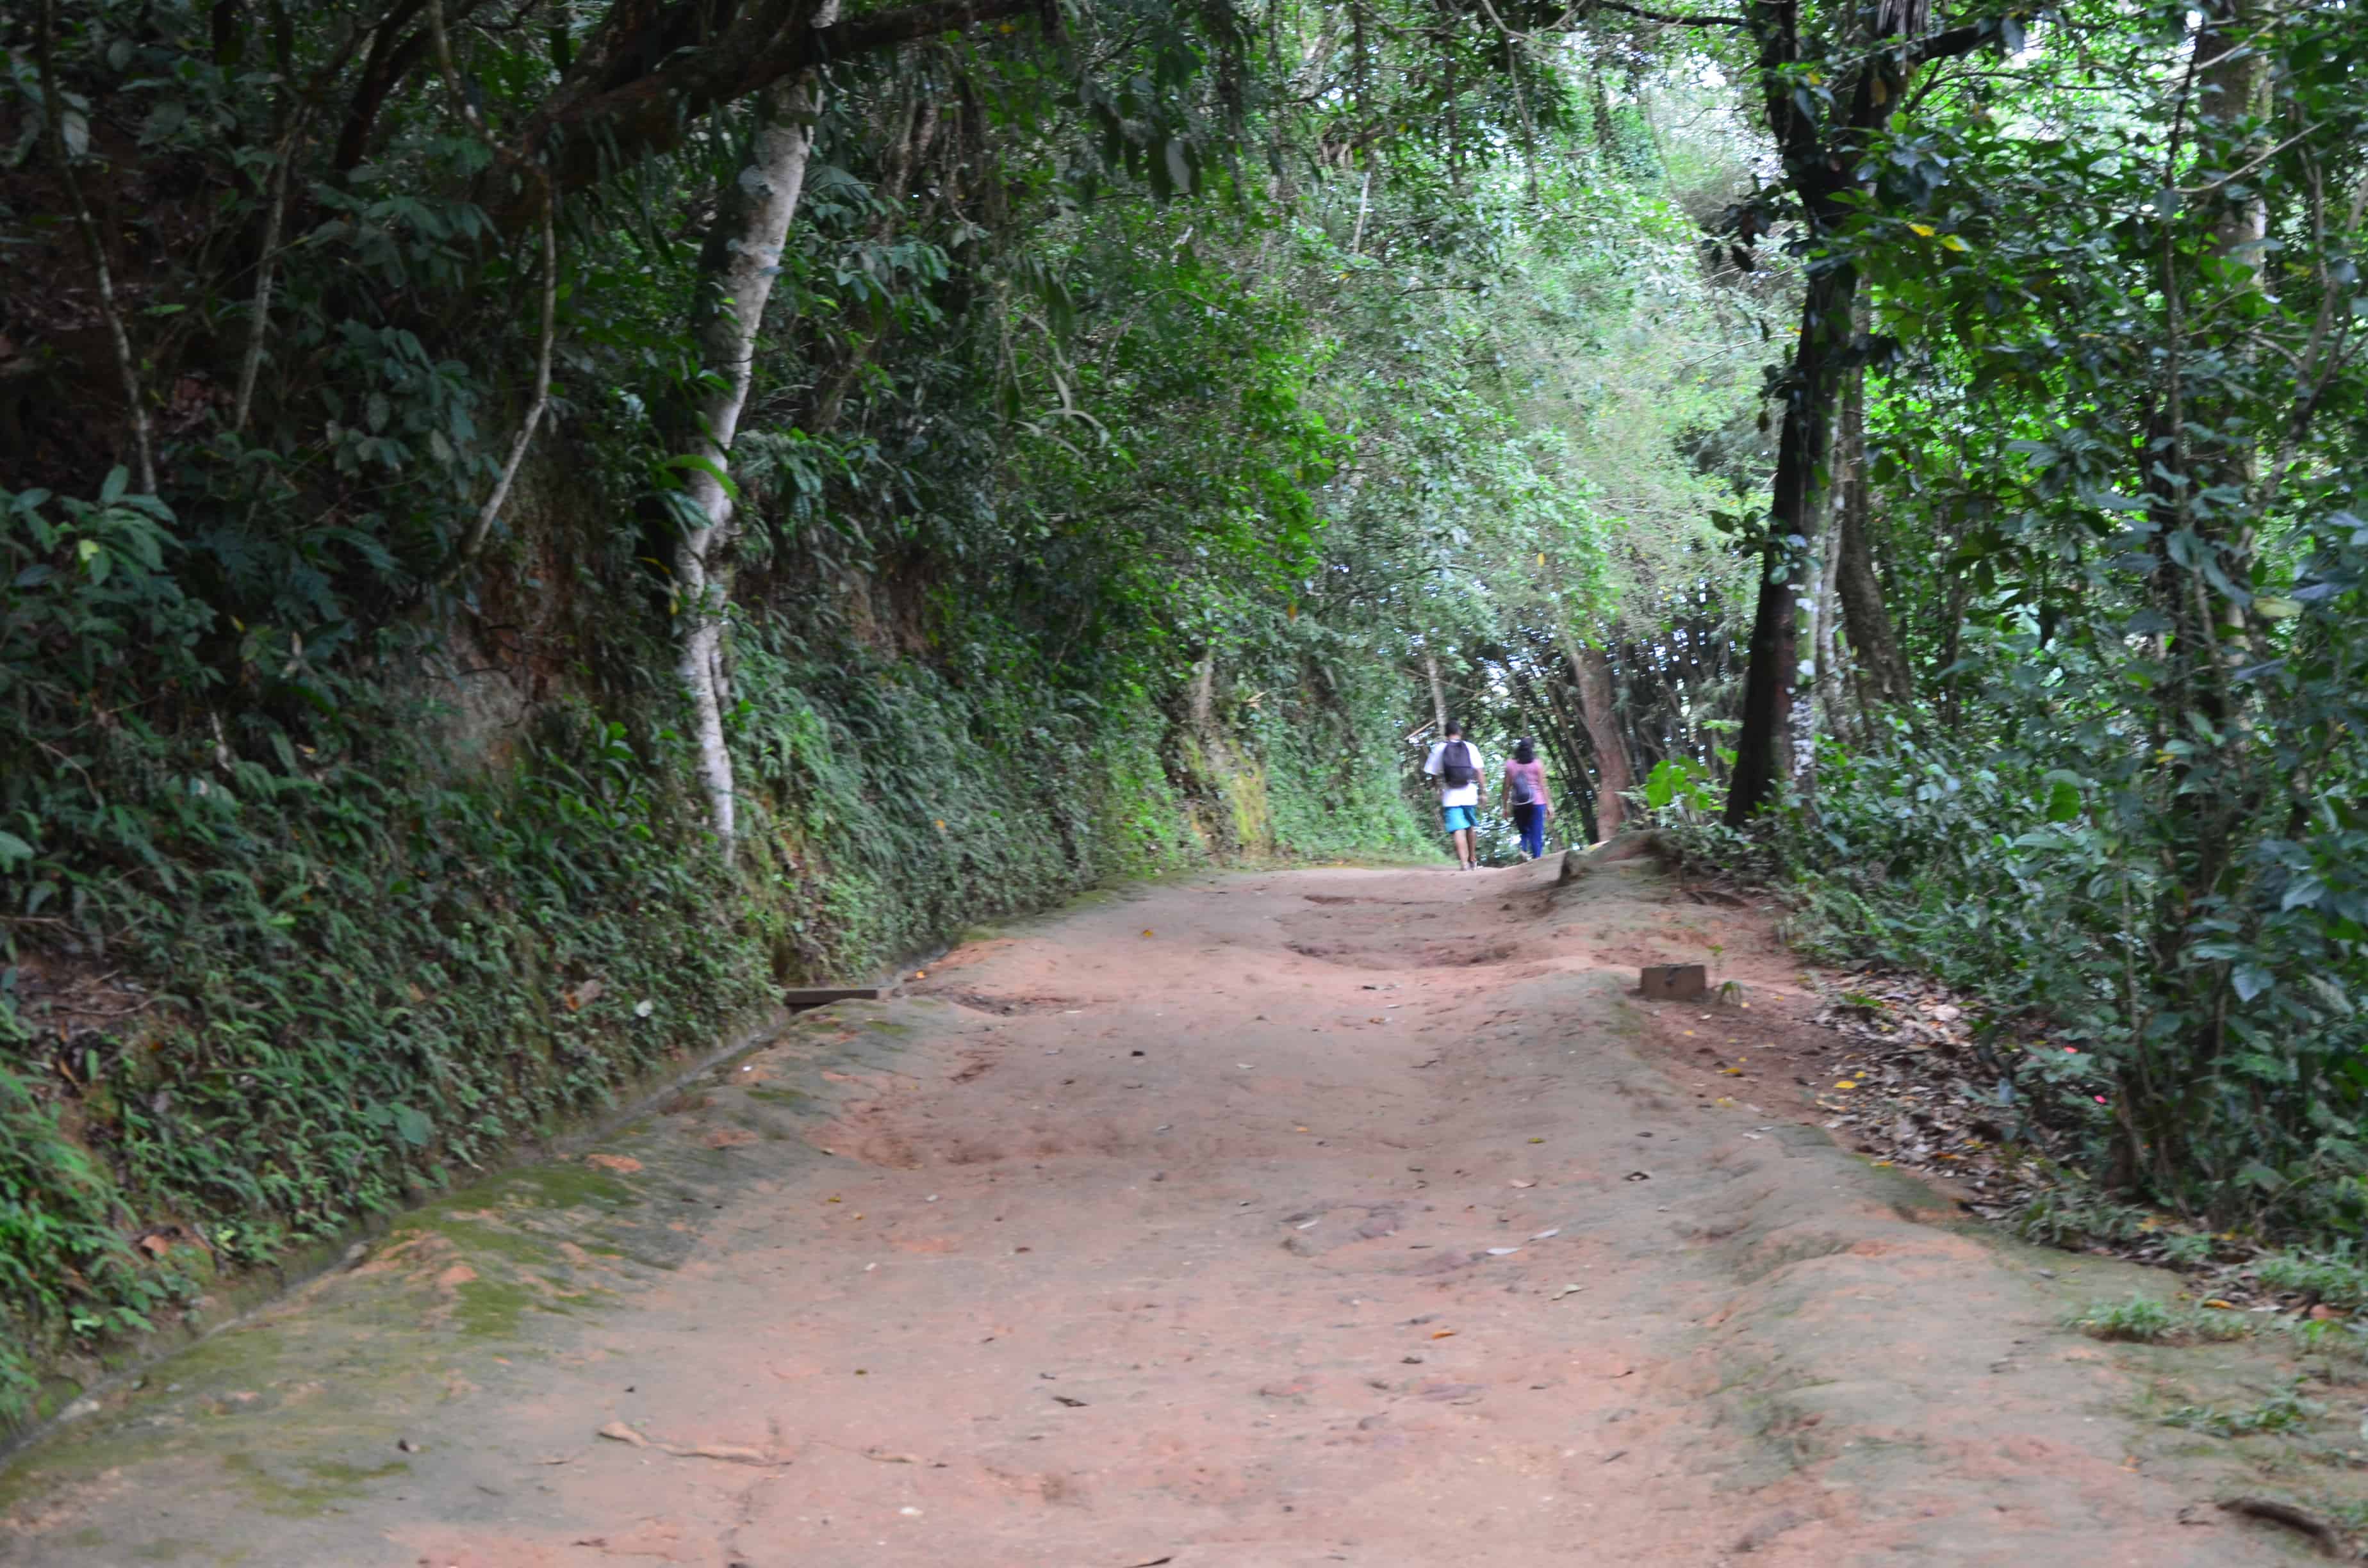 The road to Forte Defensor Perpétuo in Paraty, Brazil